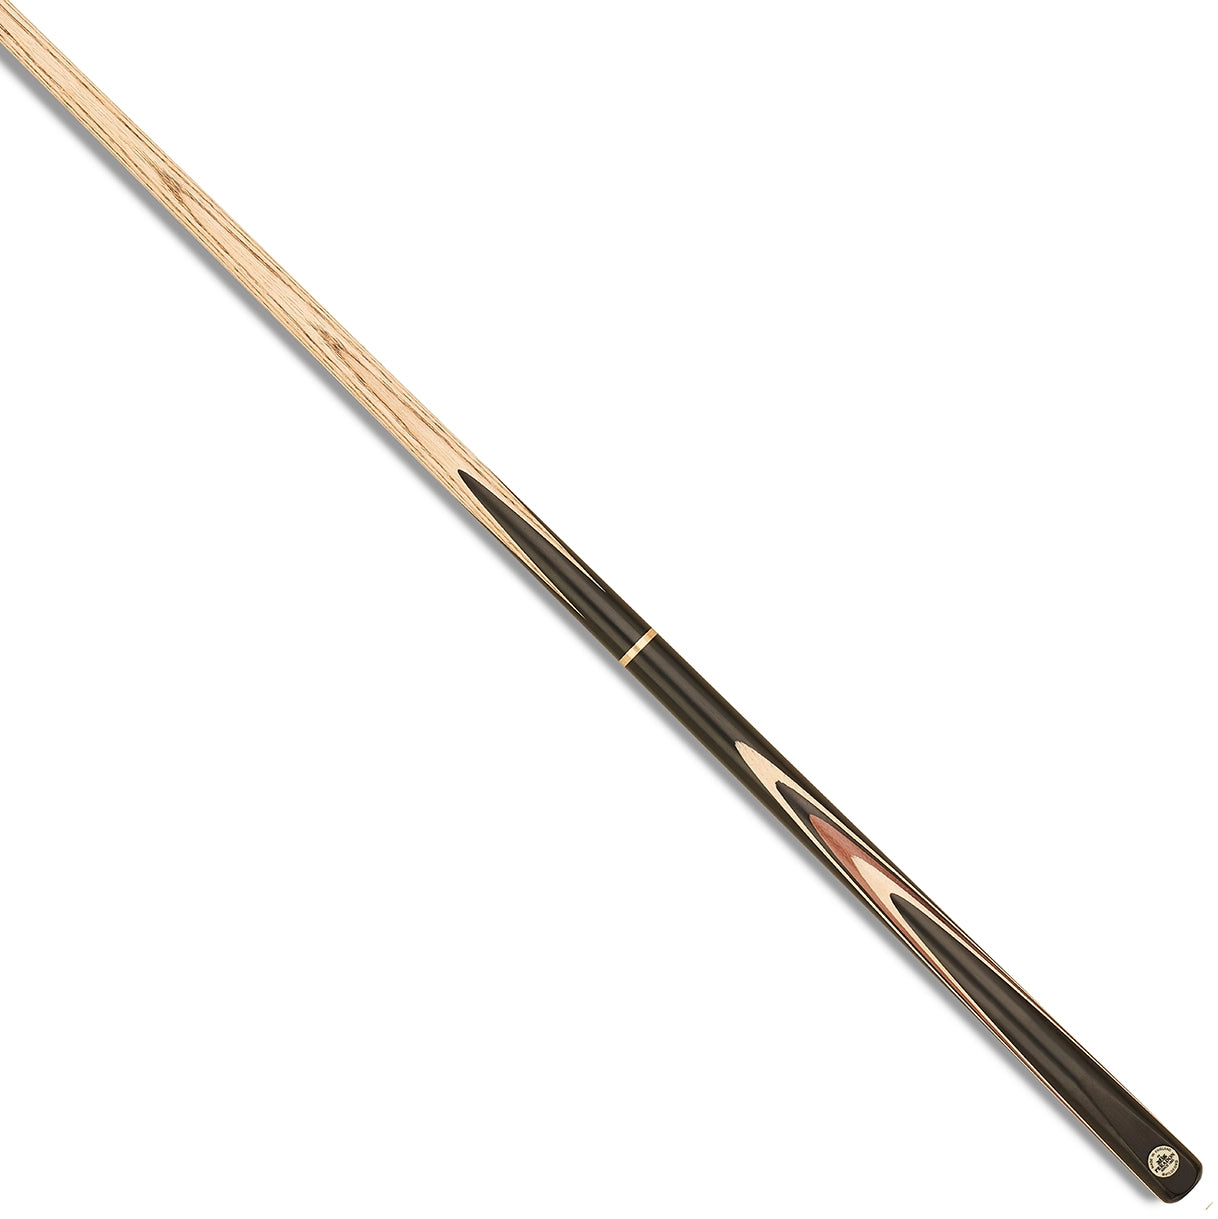 Peradon Guildford 3/4 Jointed Snooker Cue. On angle view